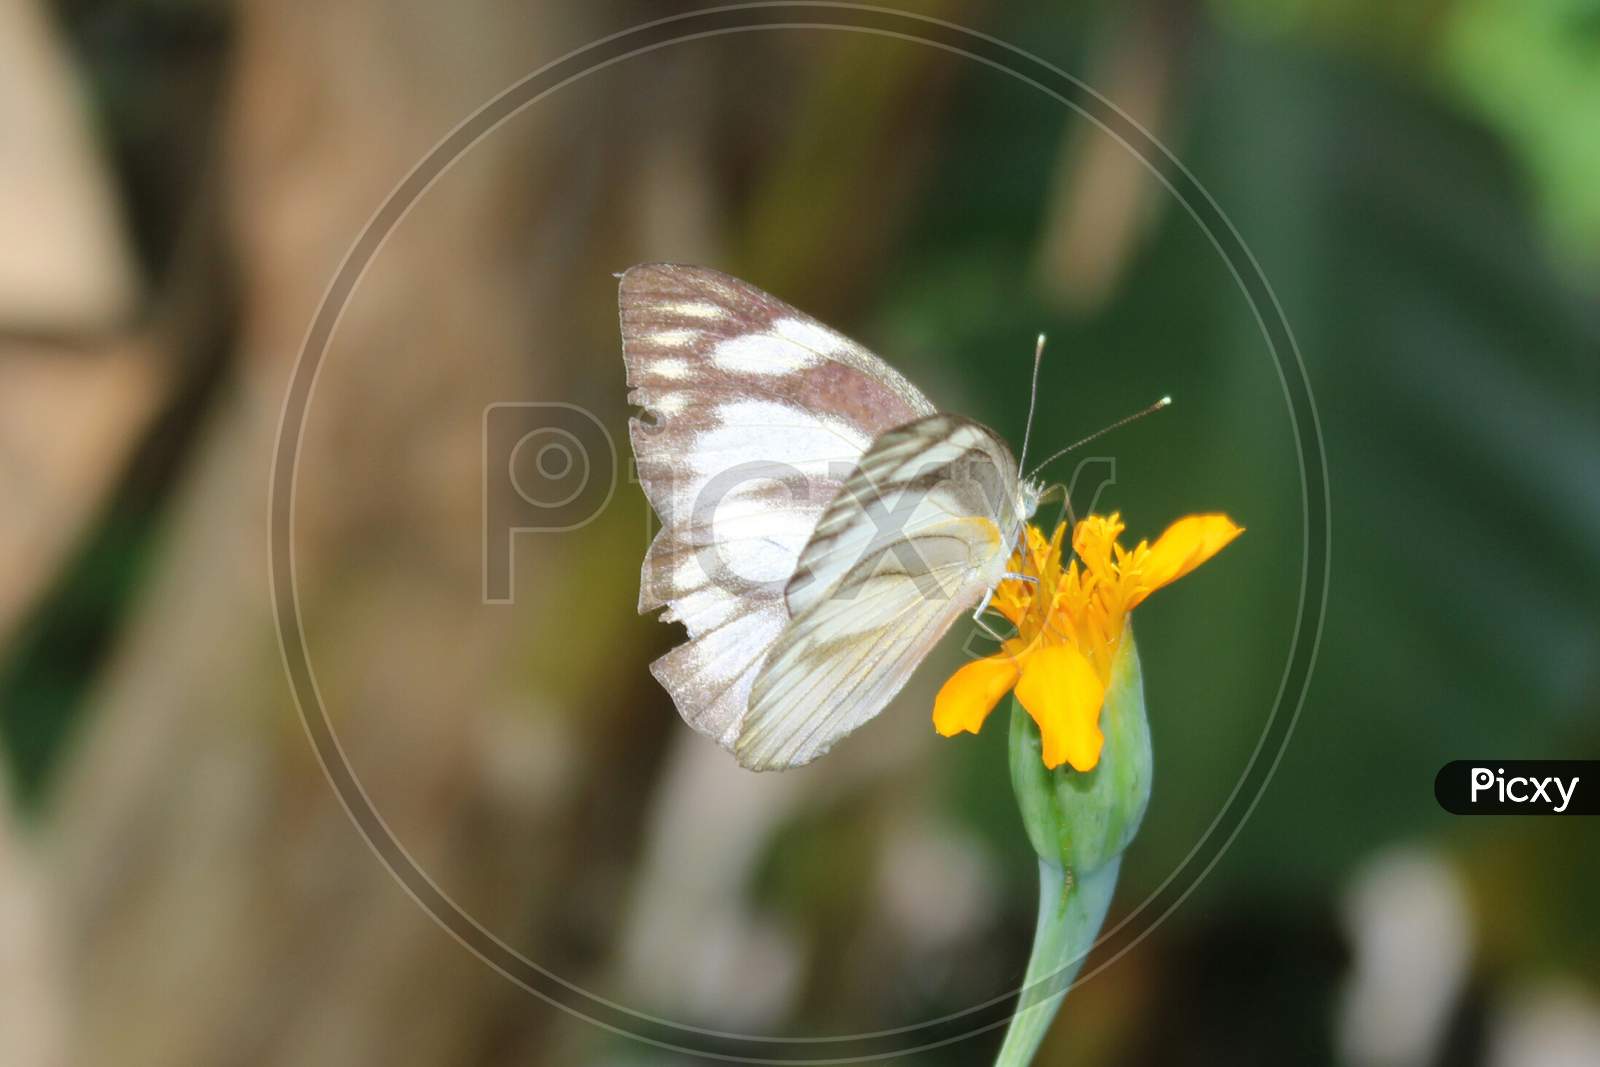 Butterfly Sitting On The Calendula Flower With Blurred Background.